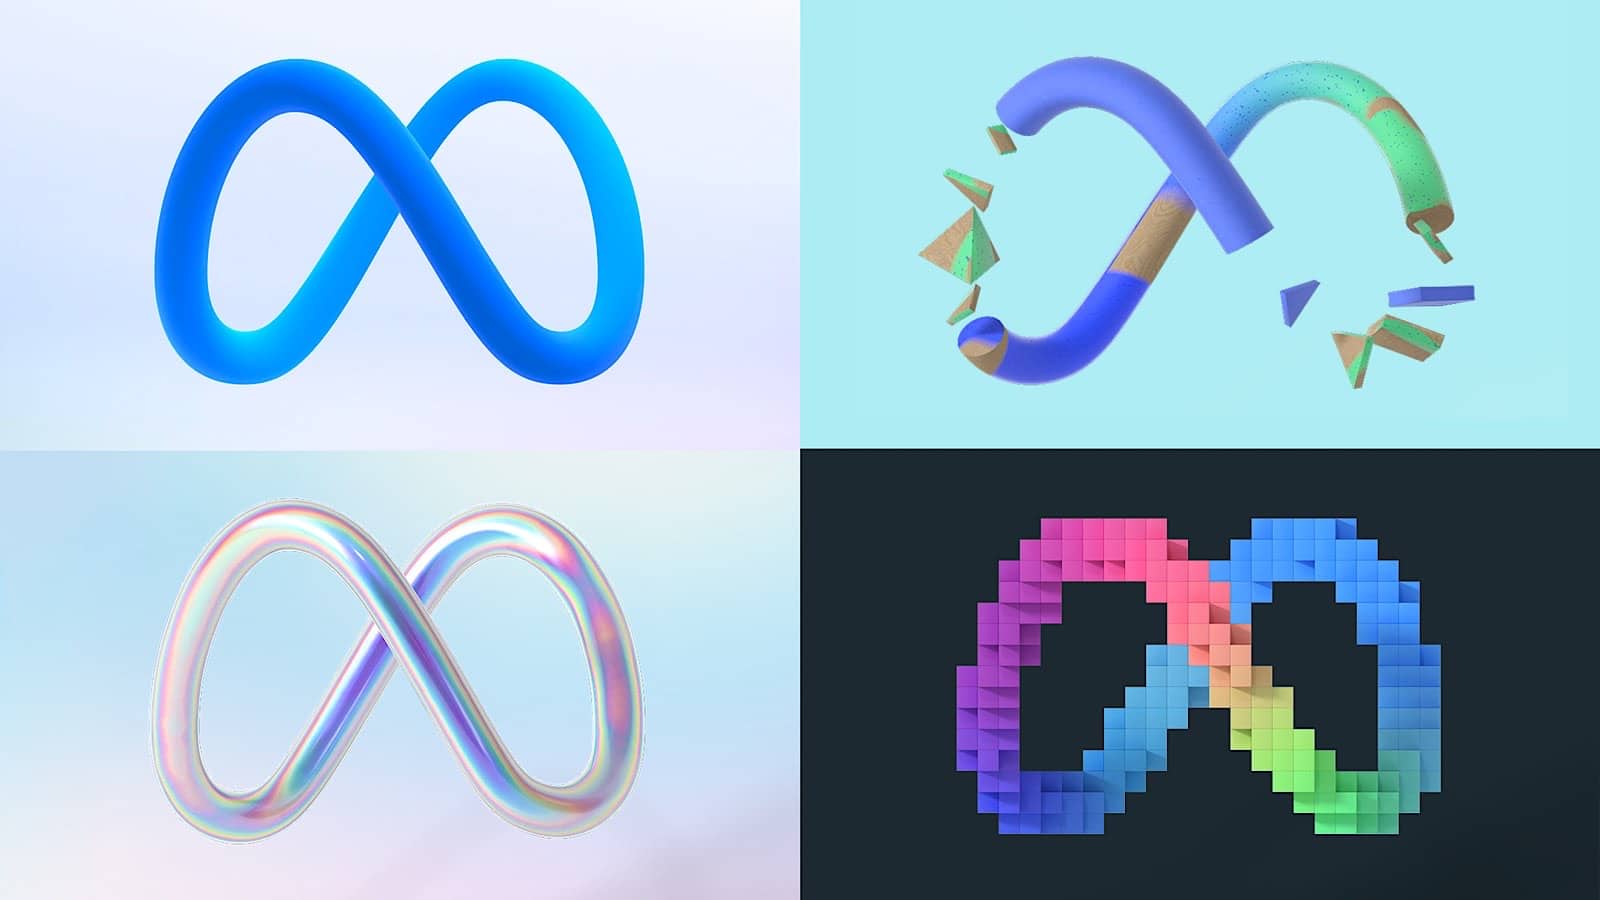 Meta, formerly Facebook, will use the infinity shape of a lemniscate to represent the metaverse.